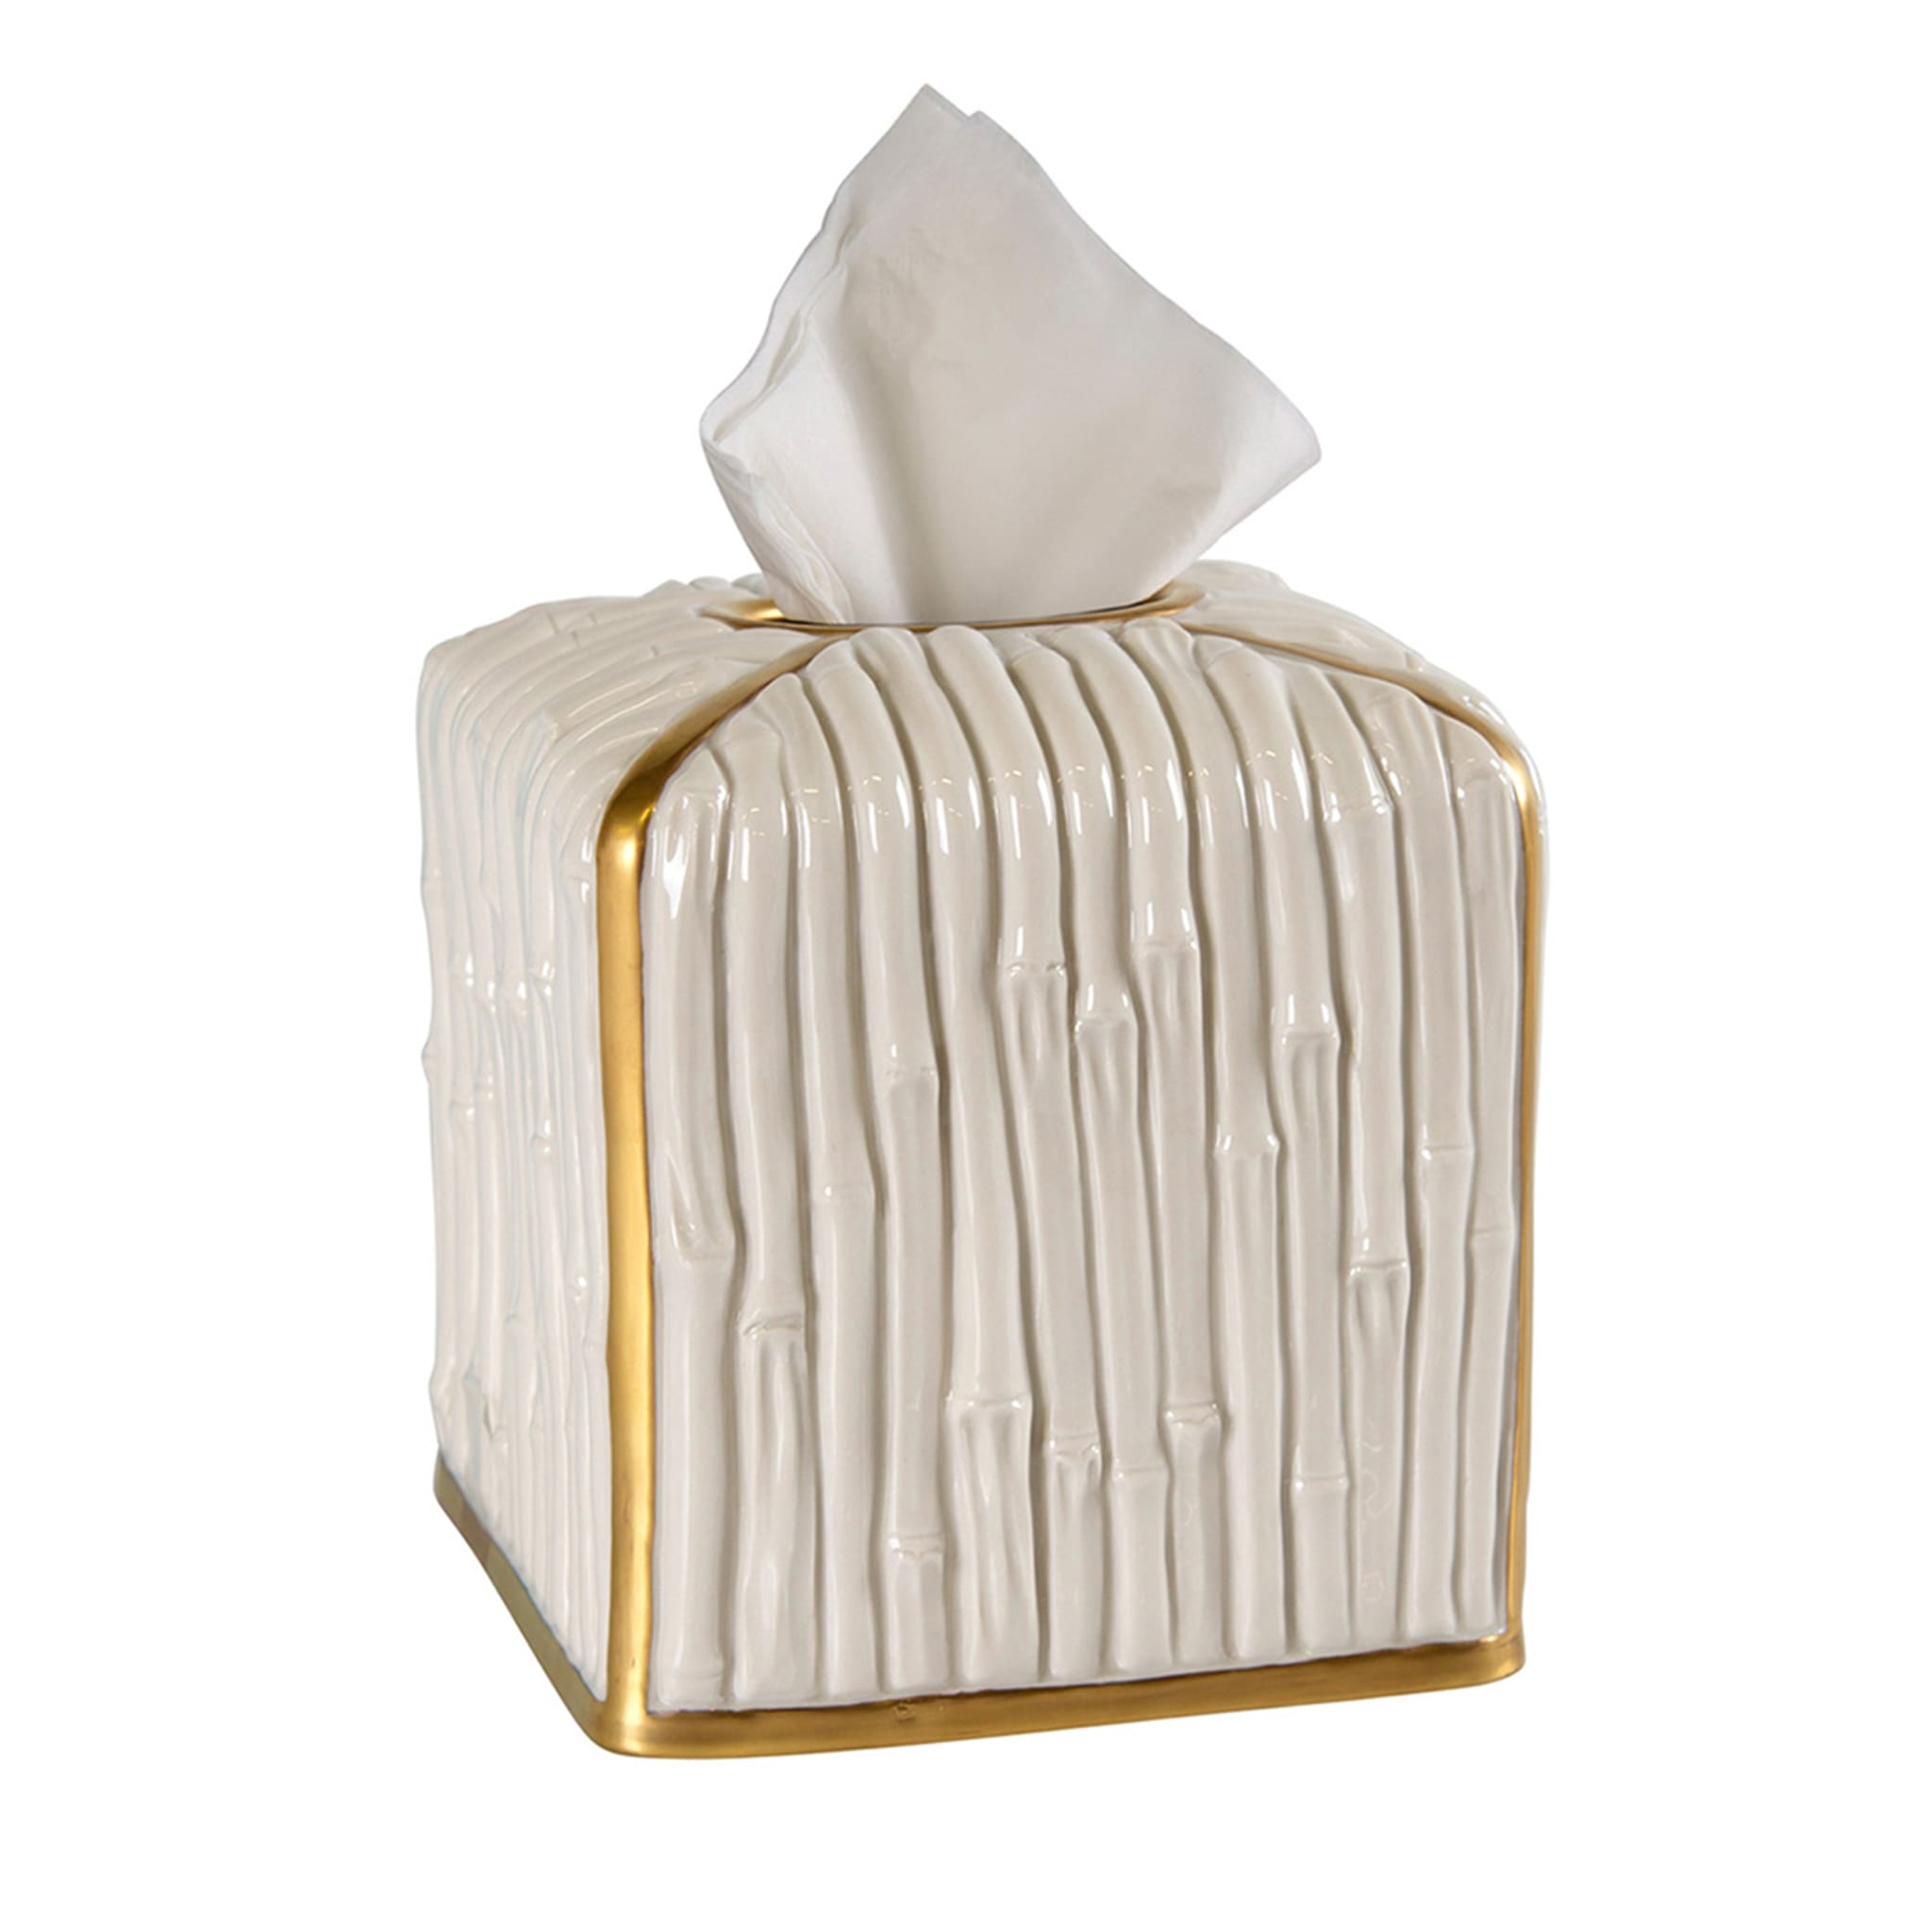 BAMBOO TISSUE BOX - WHITE AND GOLD - Main view